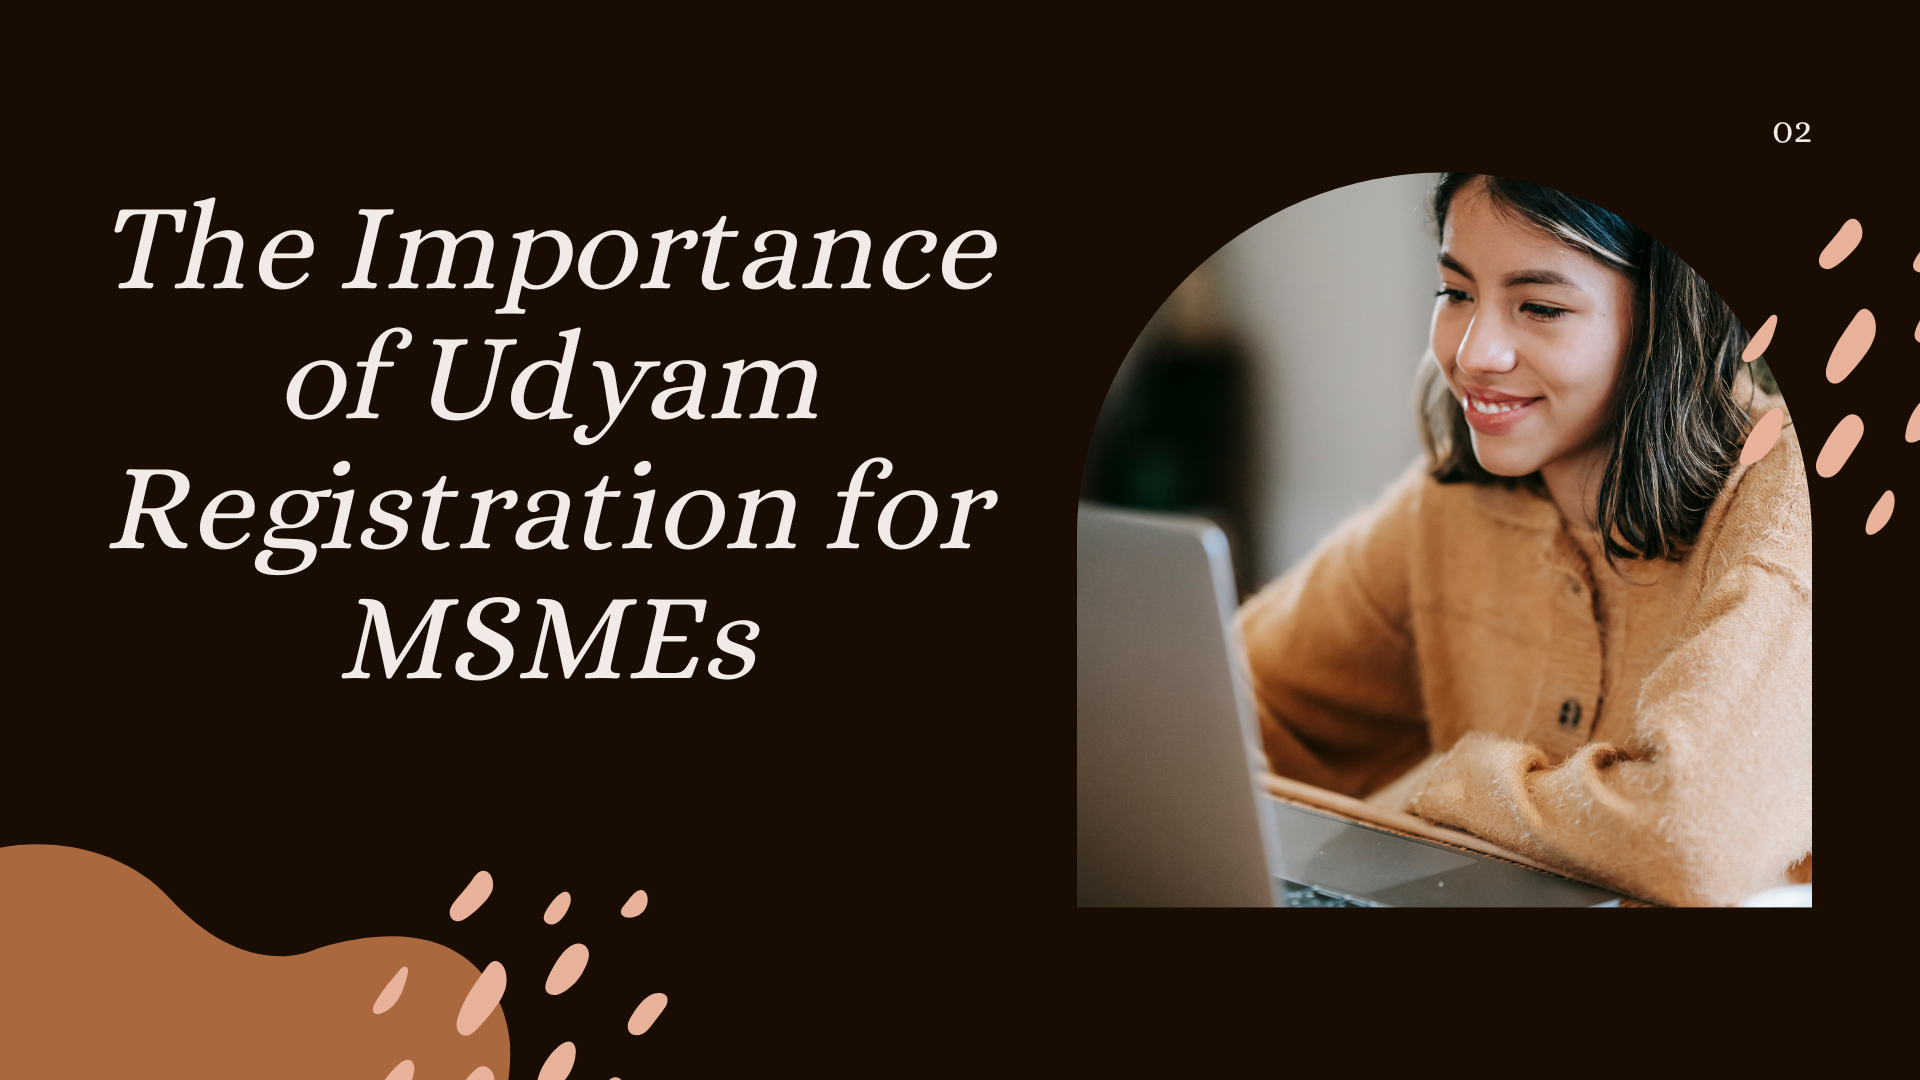 The Importance of Udyam Registration for MSMEs